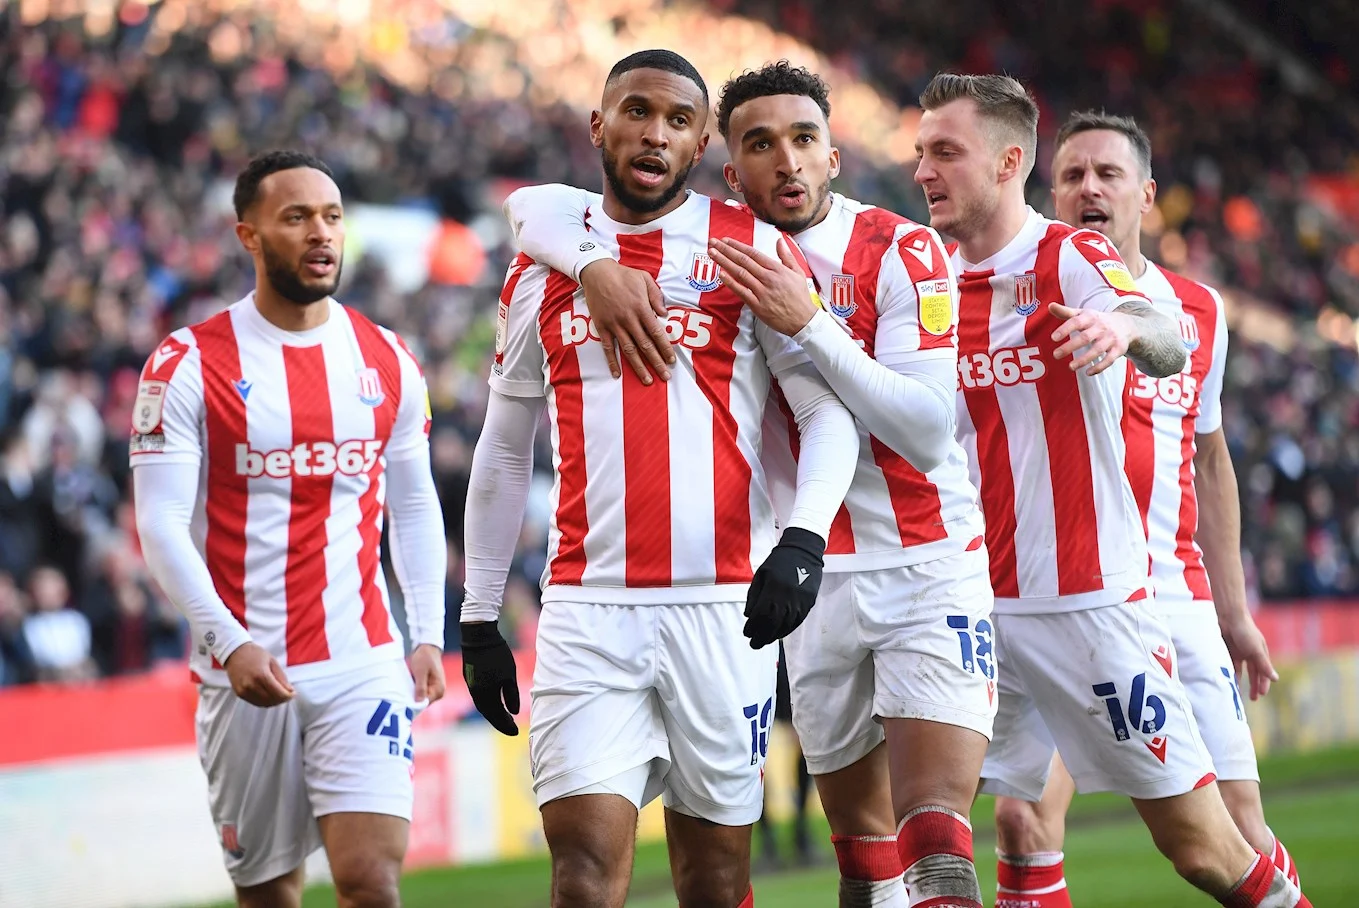 BBC Report: Stoke City’s incredible player makes a surprising statement about his team success…